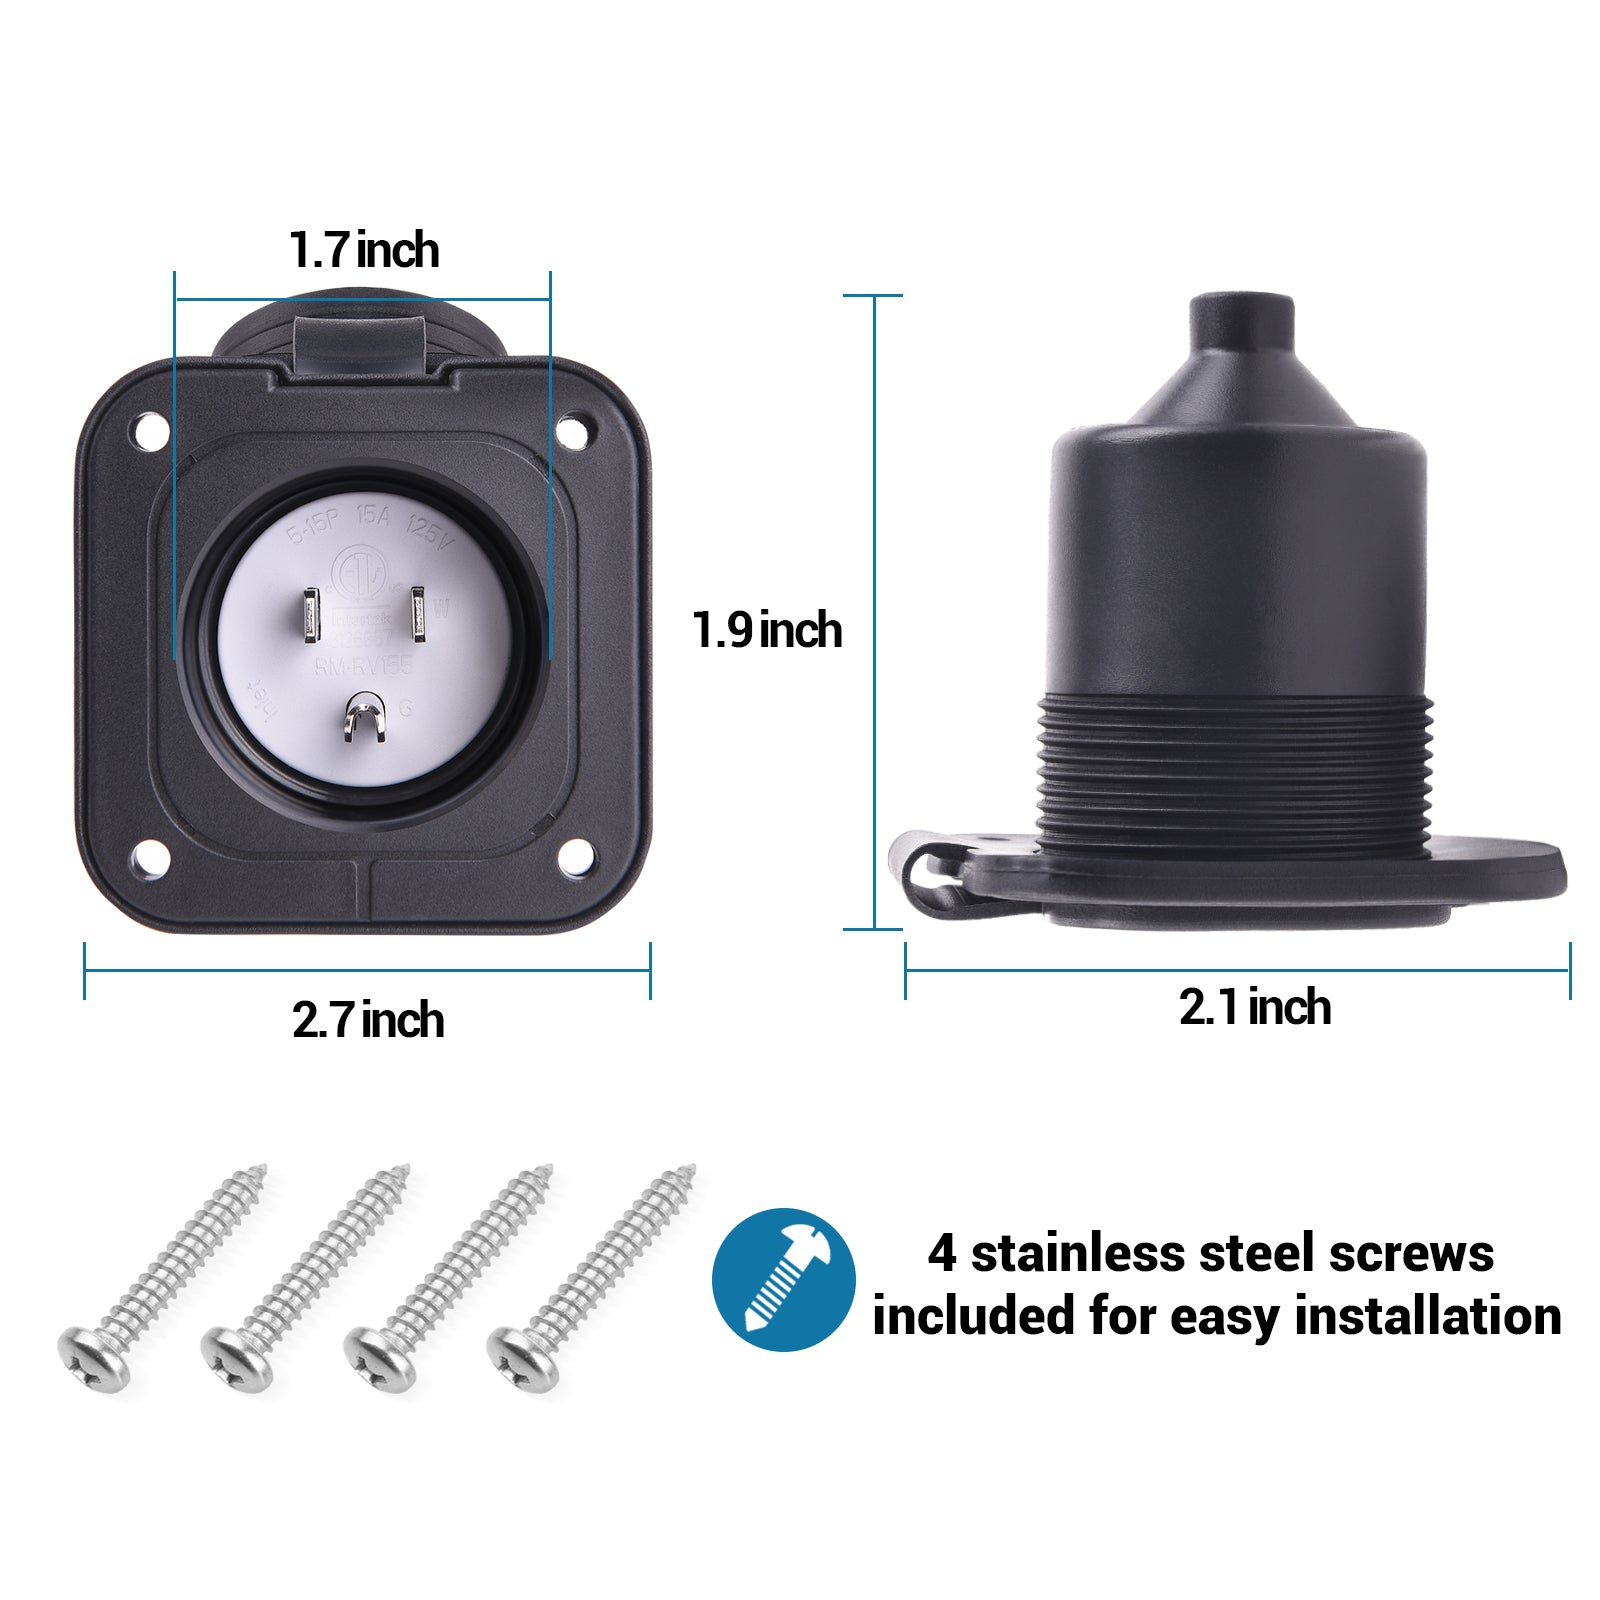 15 Amp 125V Flanged Inlet, NEMA 5-15P 2 Pole 3-Wire AC Port Plug, RV Shore Power Inlet Plug w/ Waterproof Cover